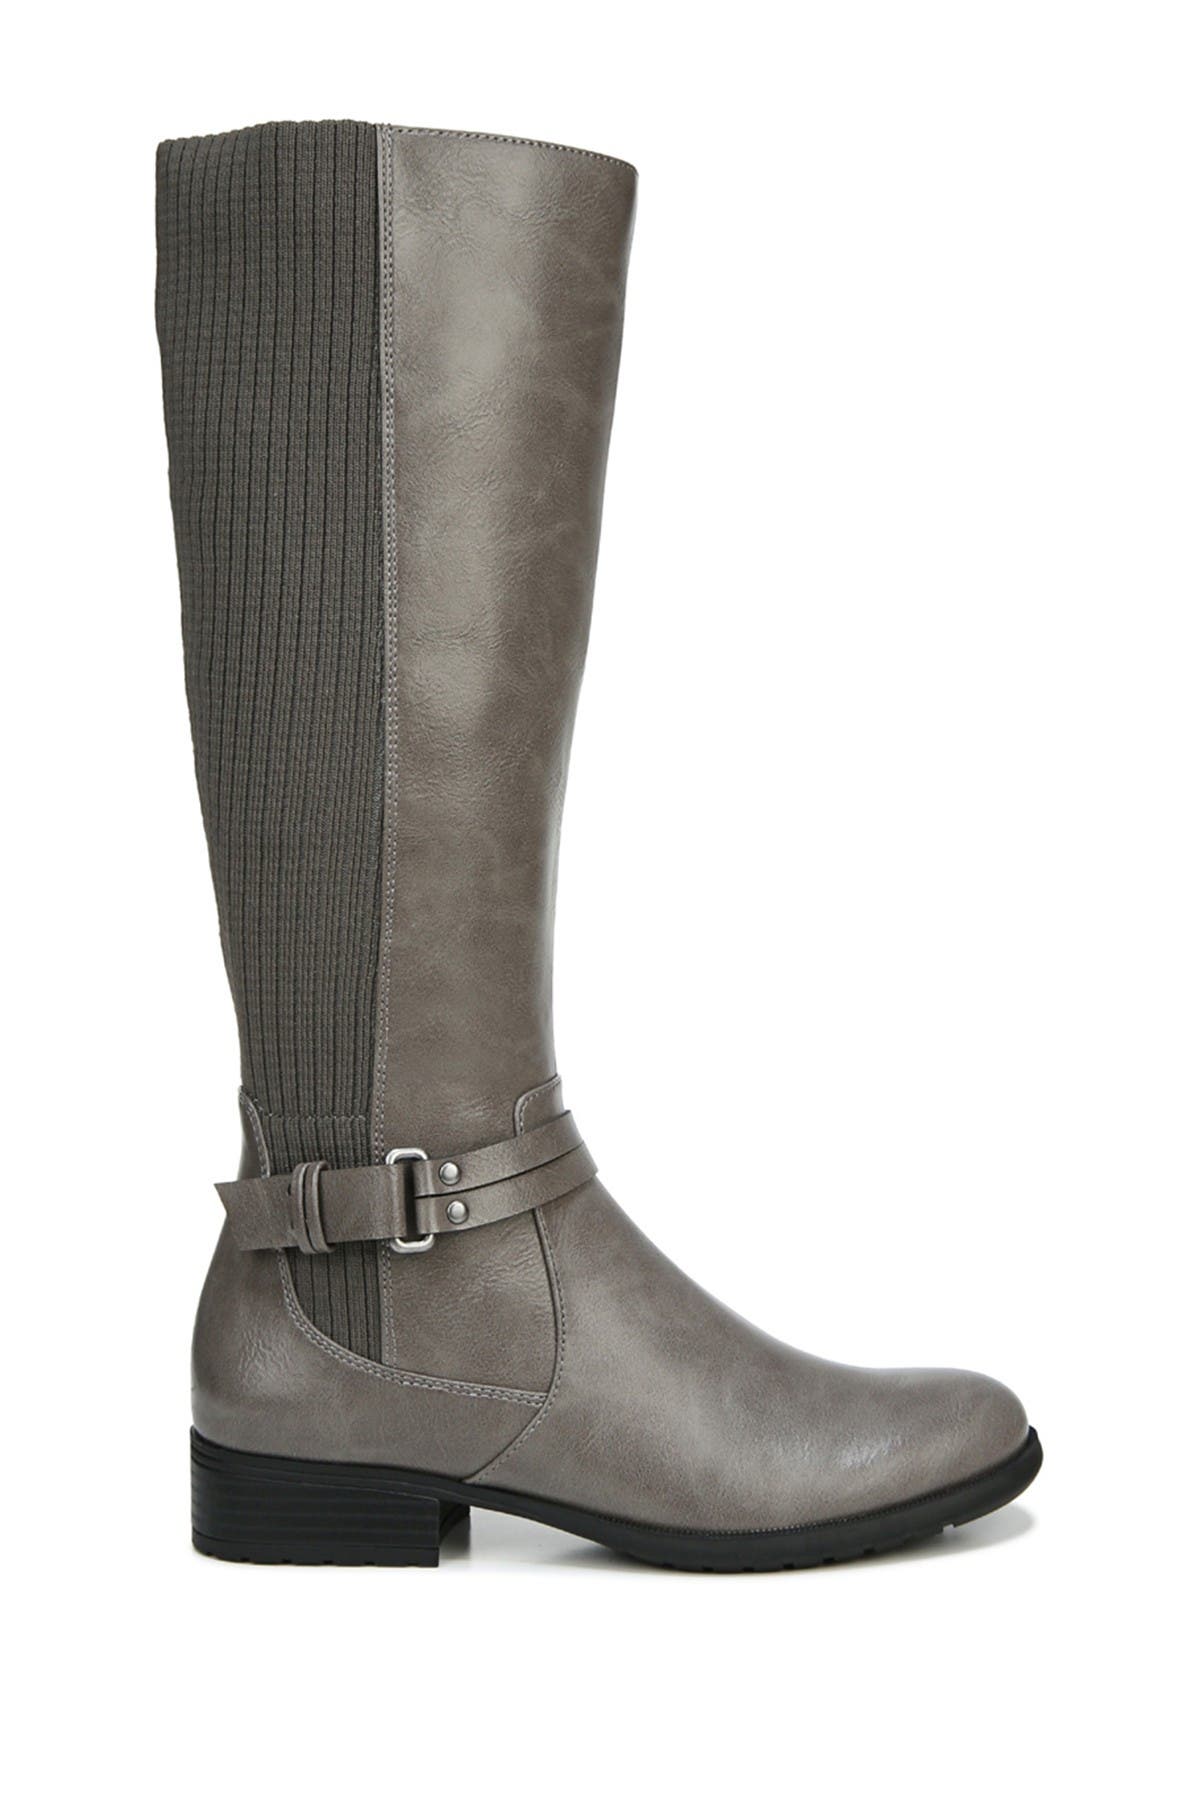 wide width riding boots